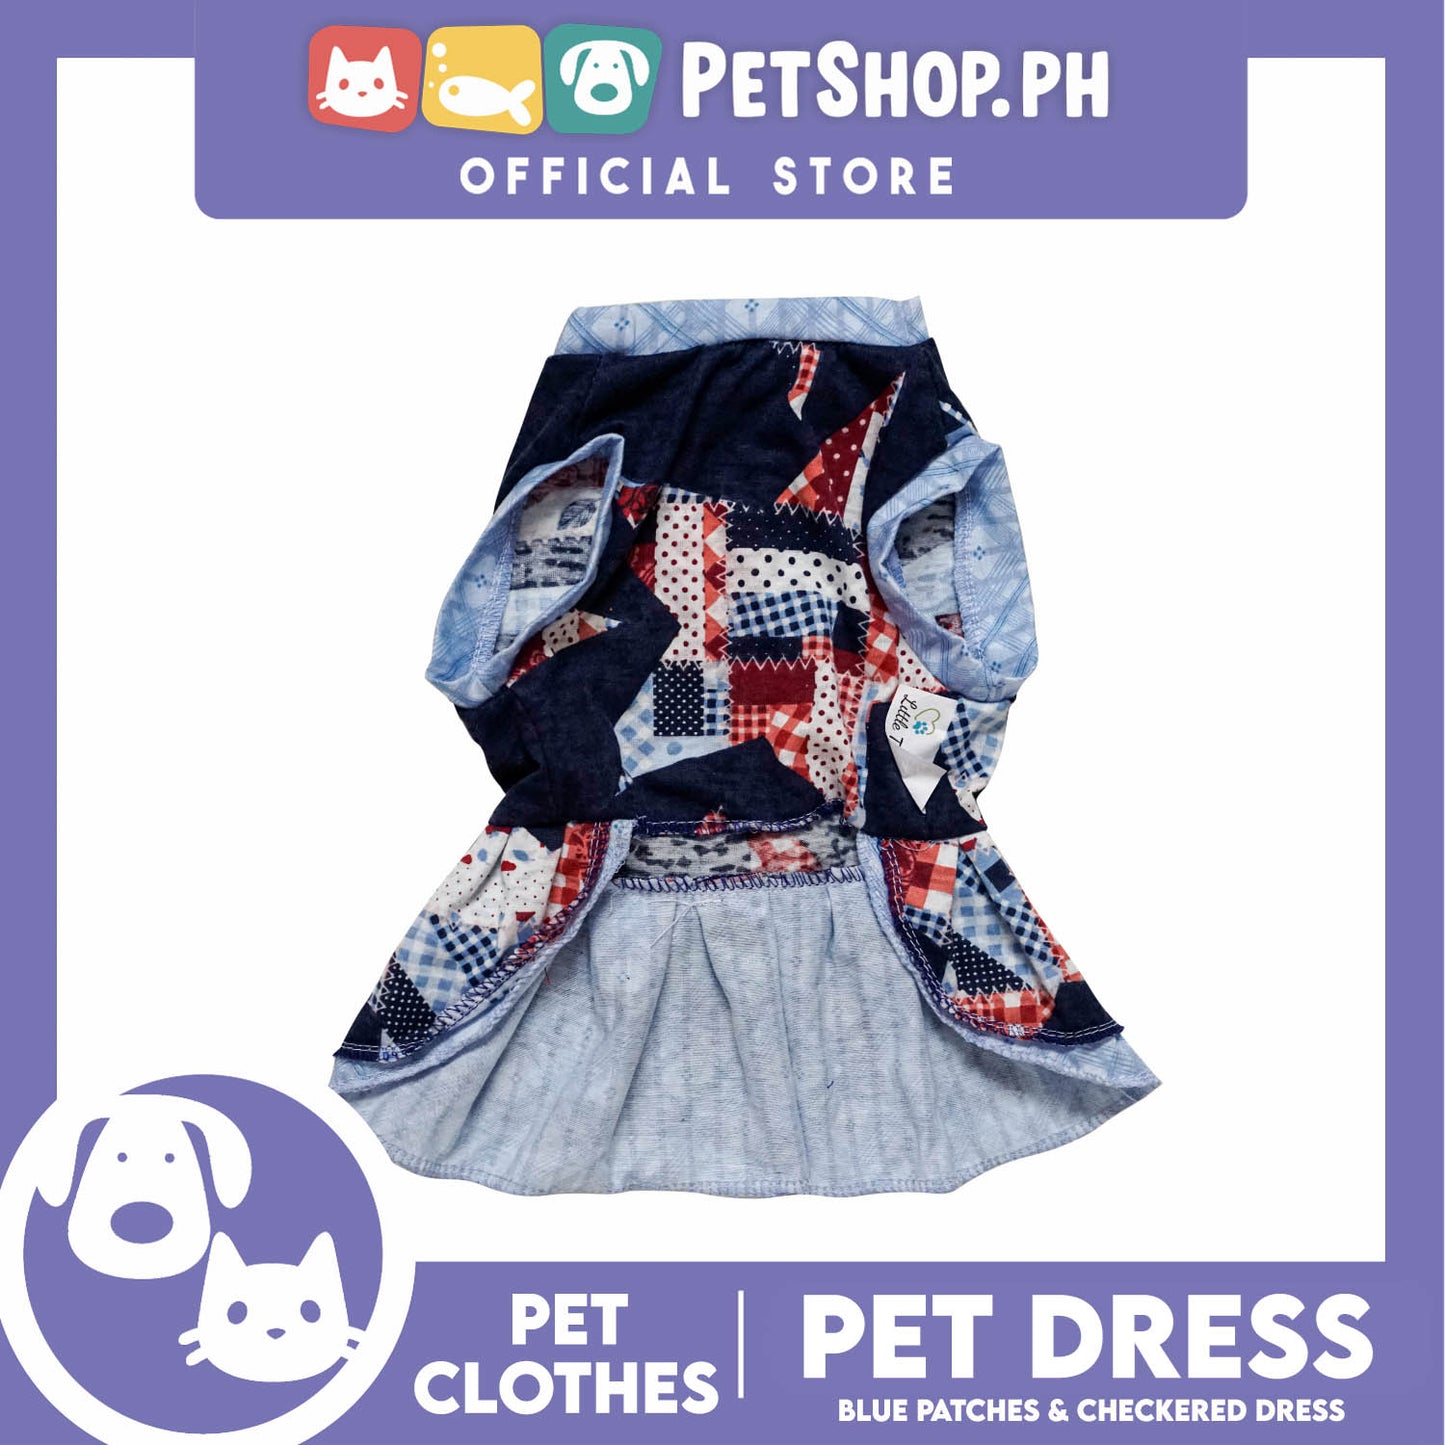 Pet Dress Blue Patches and Checkered Dress (Large) Perfect Fit for Dogs and Cats